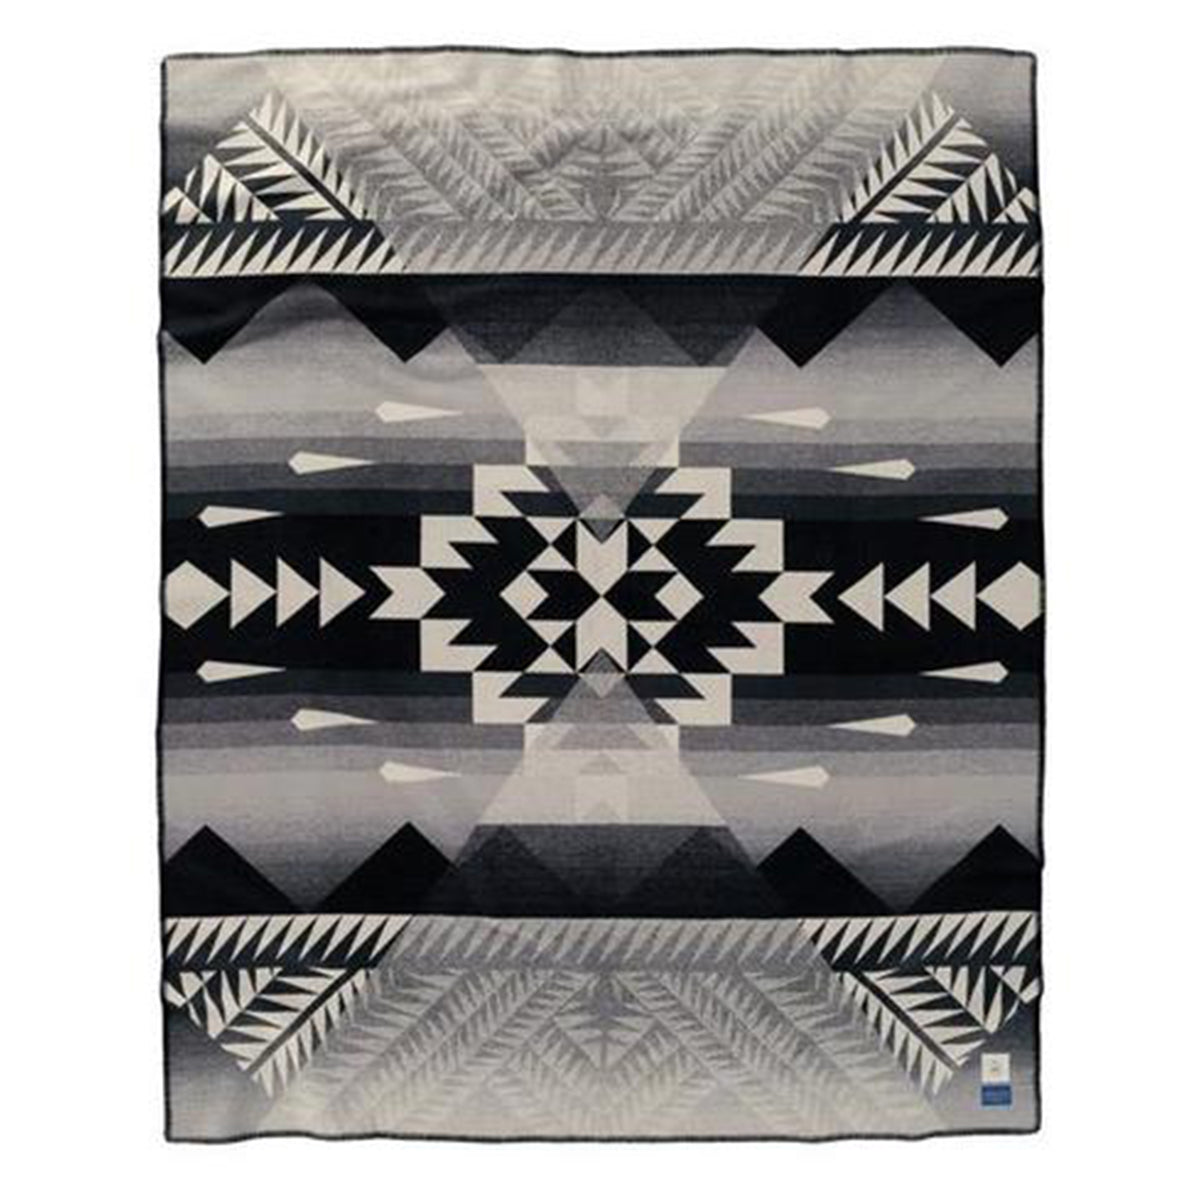 Pendleton blankets are heirloom-quality wool blankets made in the USA using wool that sourced from ranches around the country. This design is inspired by Indigenous American dress and was a creative collabertaion between Nike N7 and Pendleton Woolen Mills. The centre of the blanket prominently features the Nike N7 mark, and the blanket includes the iconic blue Pendleton Woolen Mills and black and cream Nike N7 labels.